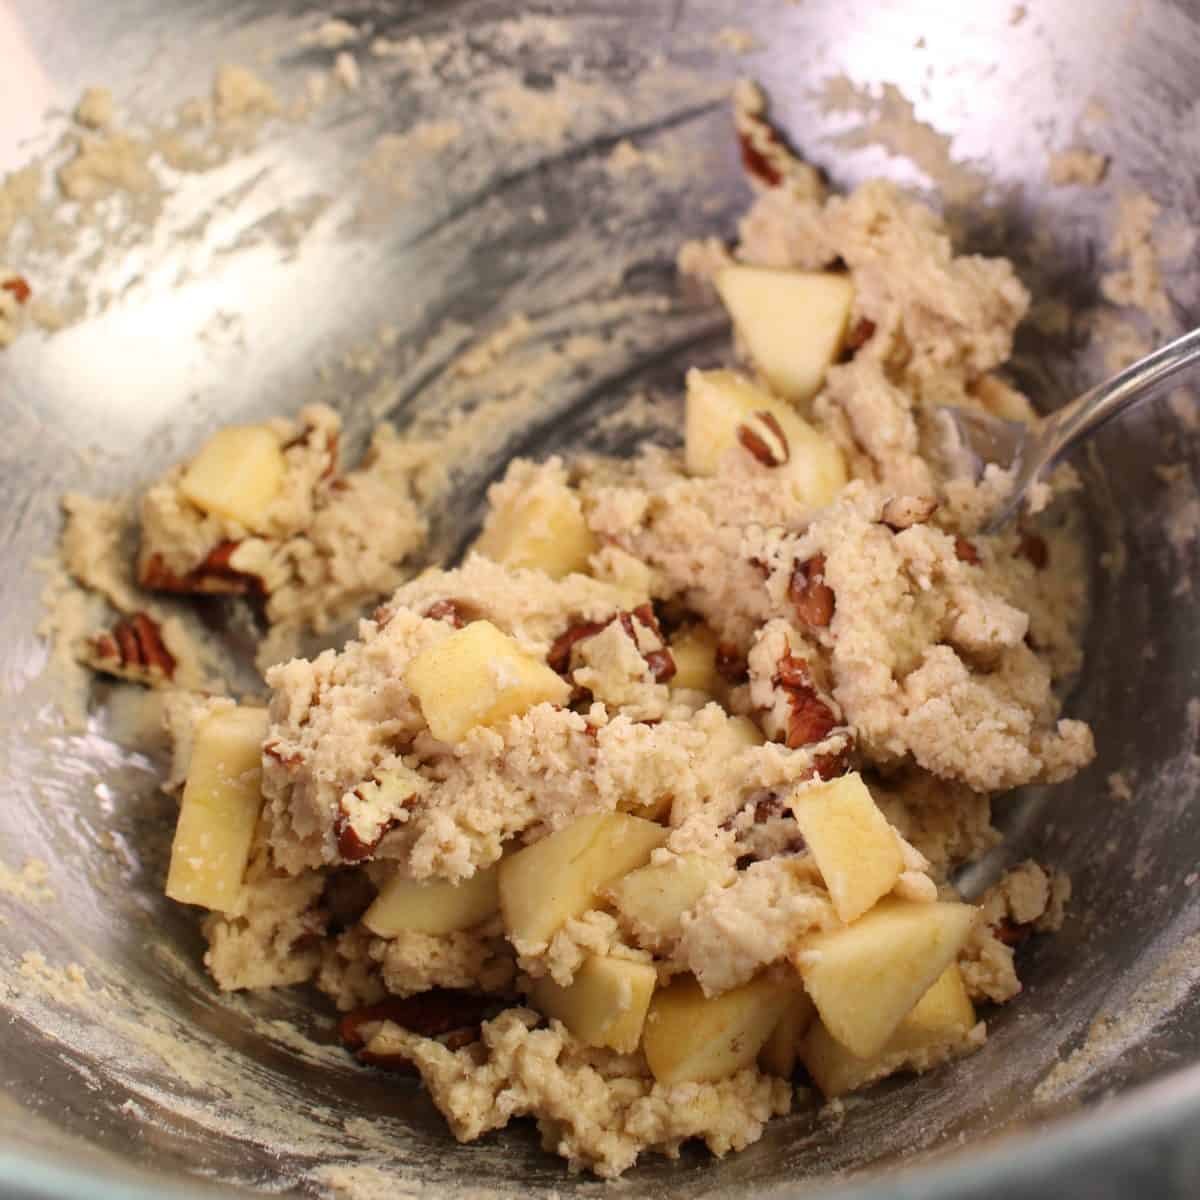 scone batter filled with apples and pecans in a mixing bowl.